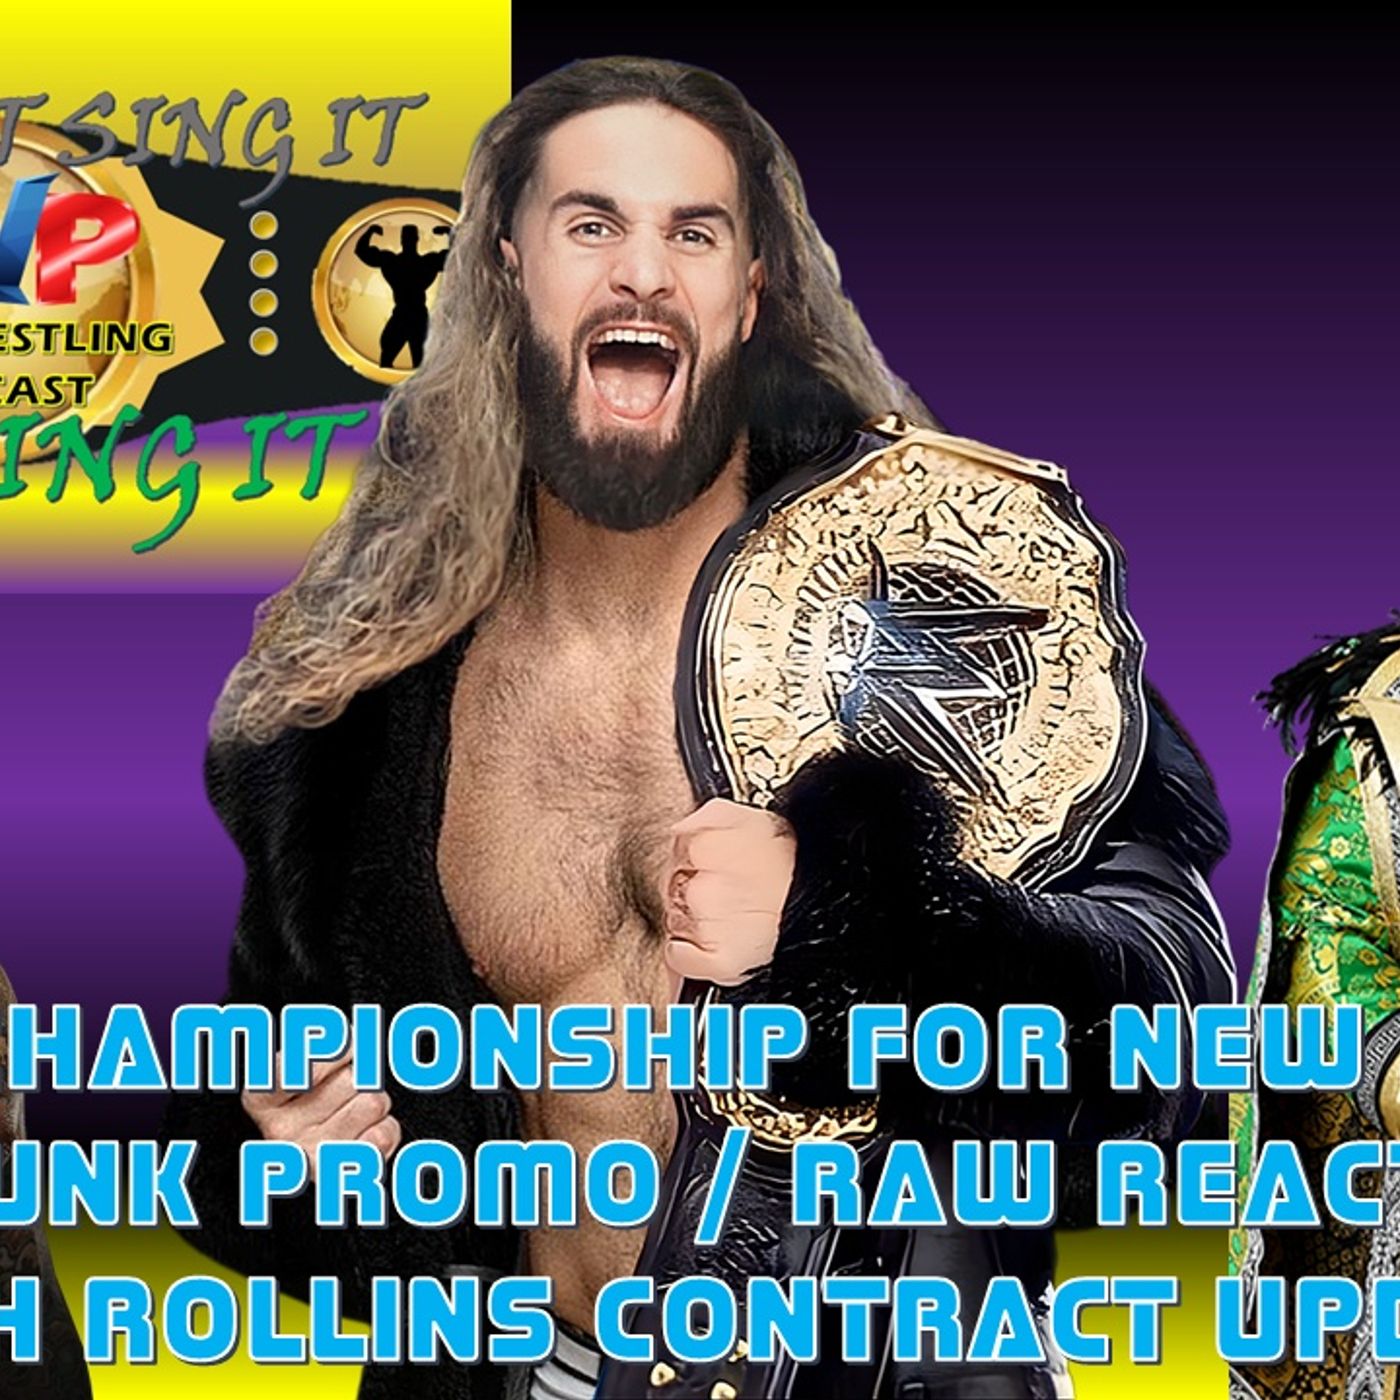 CM Punk Promo Reaction - Rollins Contract News - New Japan Championships